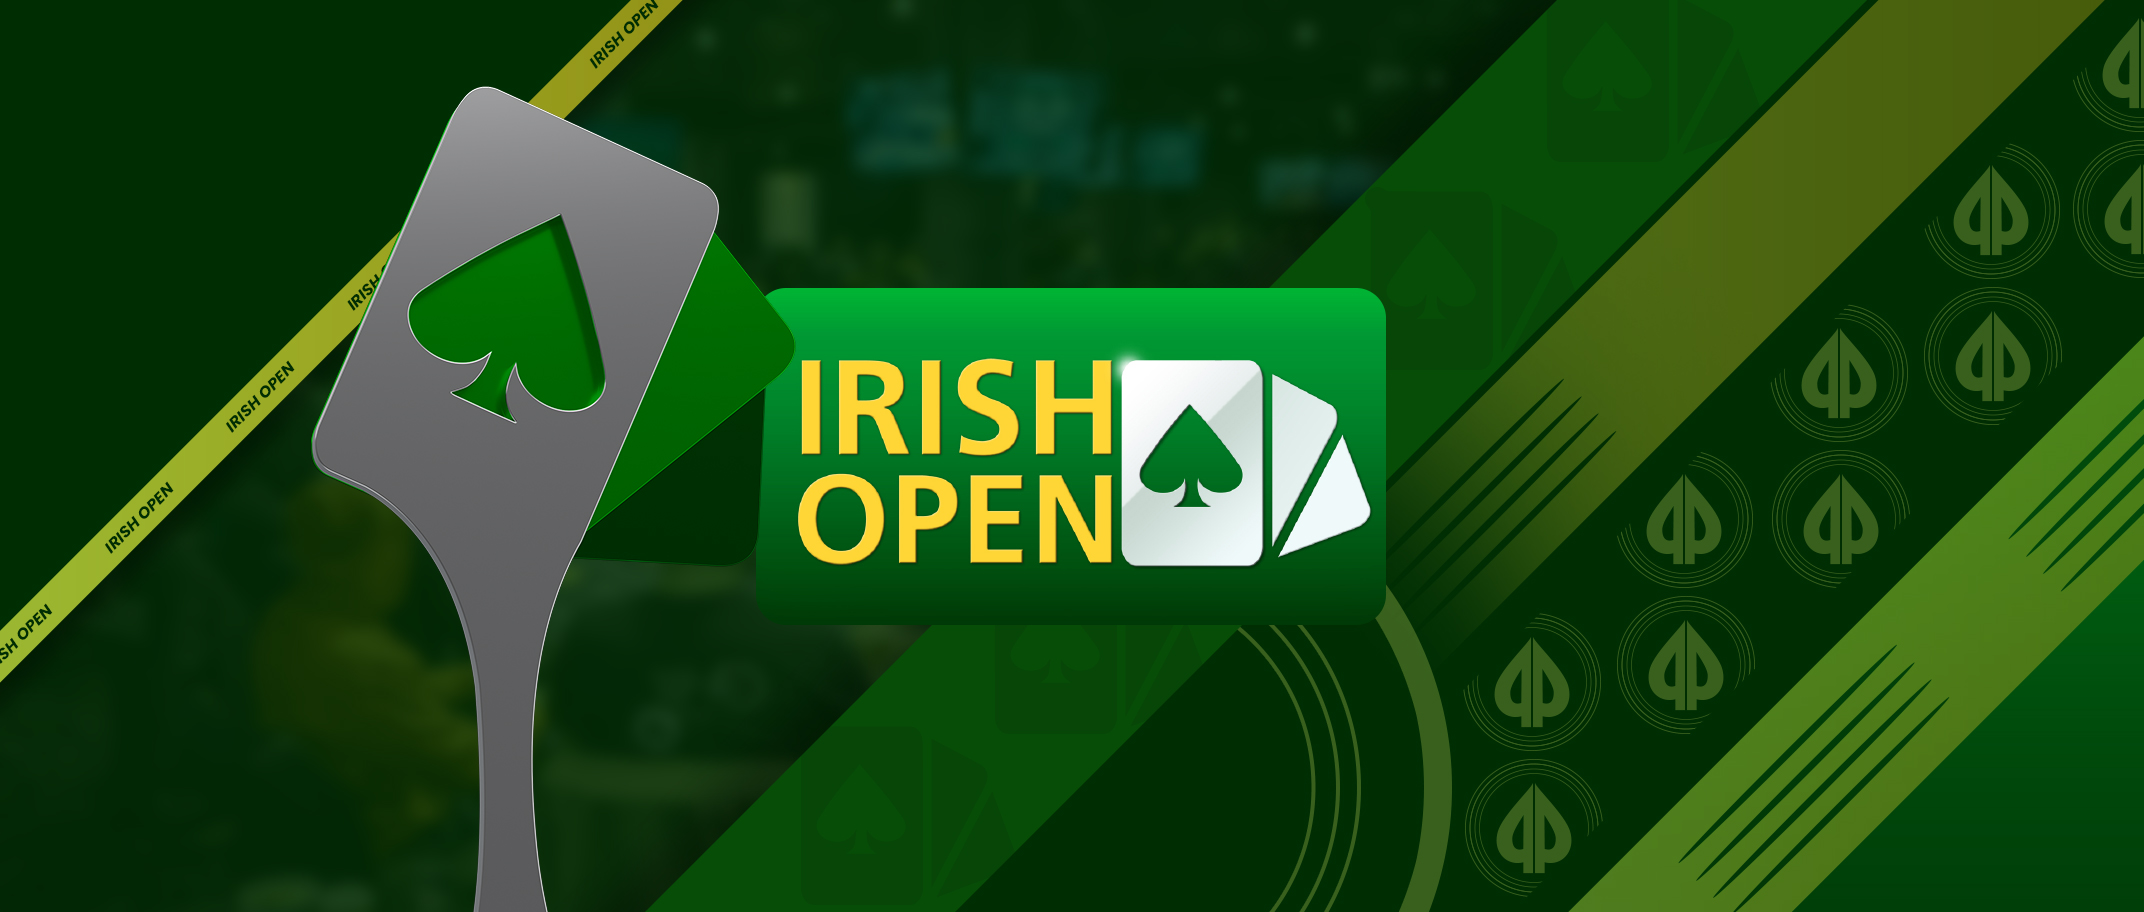 The Road to the Irish Open